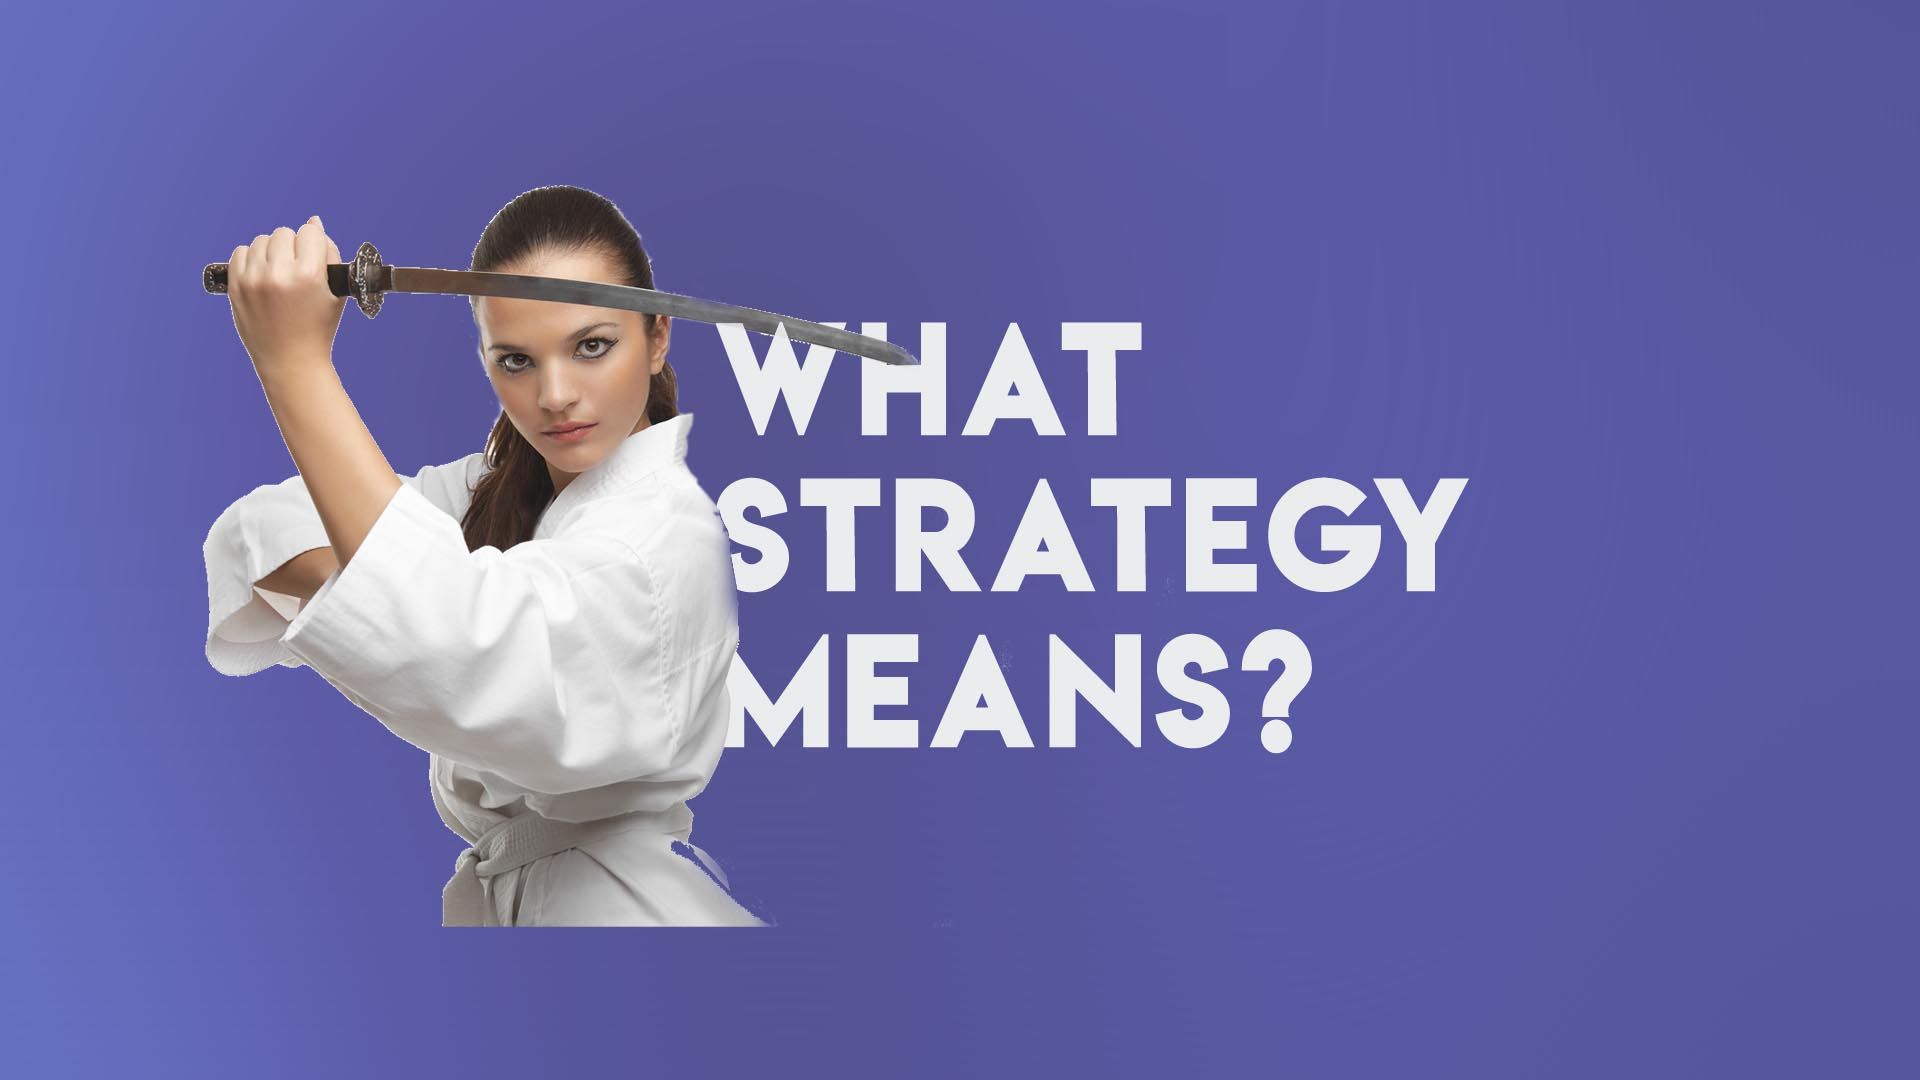 What strategy means?